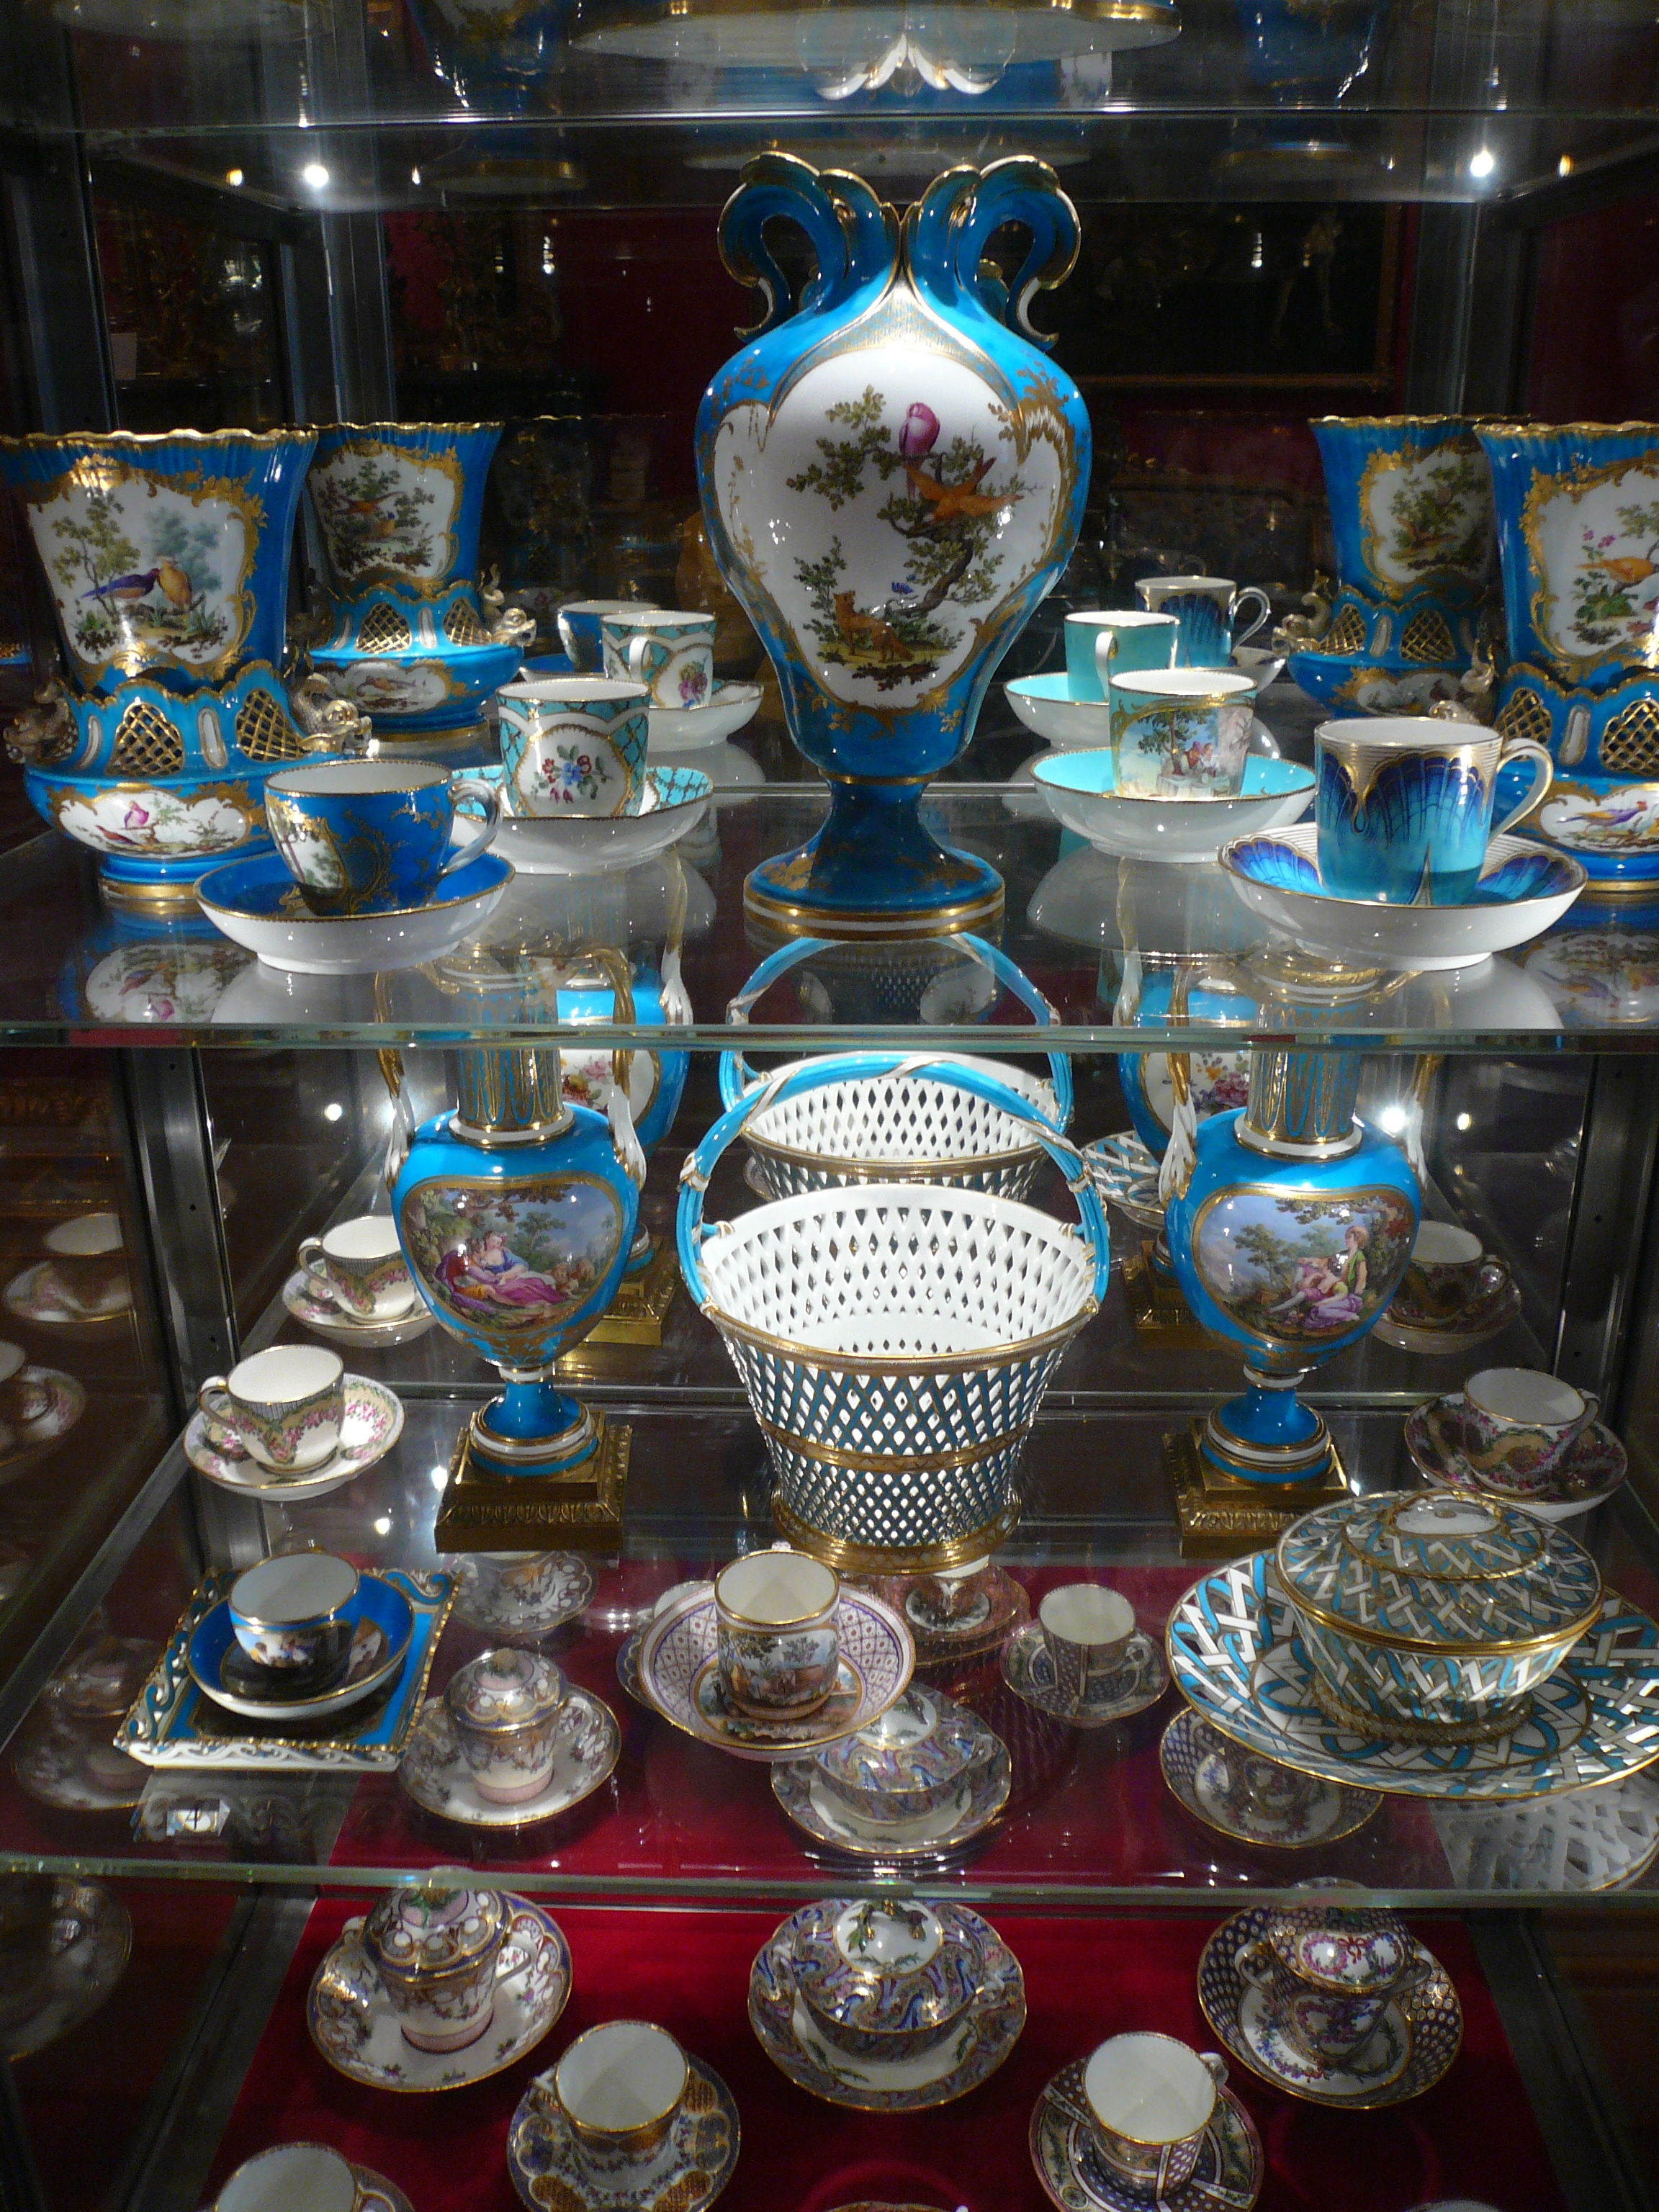 Sèvres porcelain in the Wallace Collection, London, May 2017, photograph author’s own.